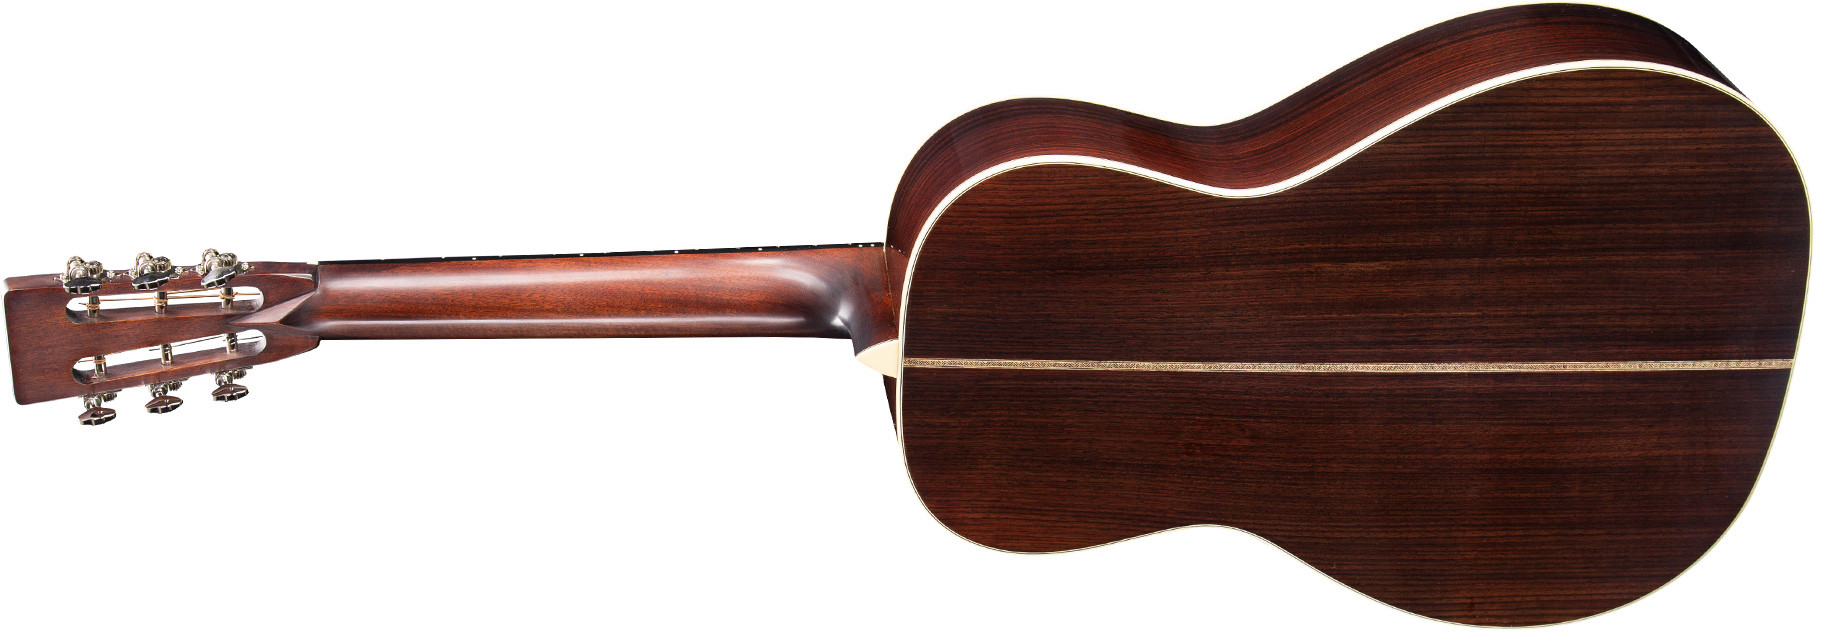 Eastman E20p Traditional Parlor Epicea Palissandre Eb - Natural - Westerngitarre & electro - Variation 1